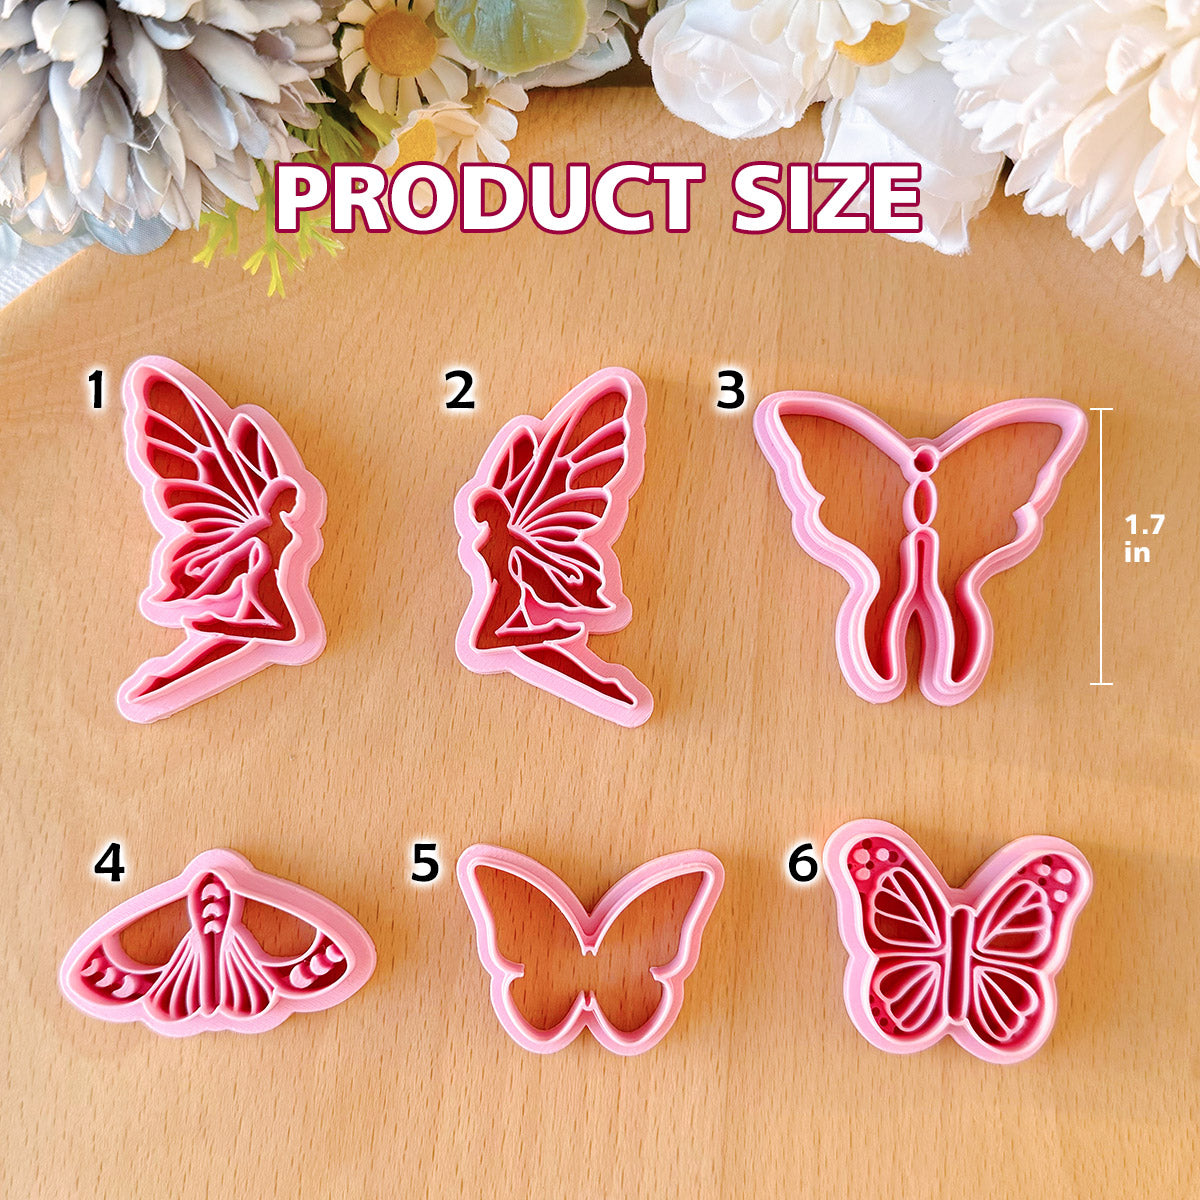 KEOKER Butterfly Polymer Clay Cutters (7 Shapes)